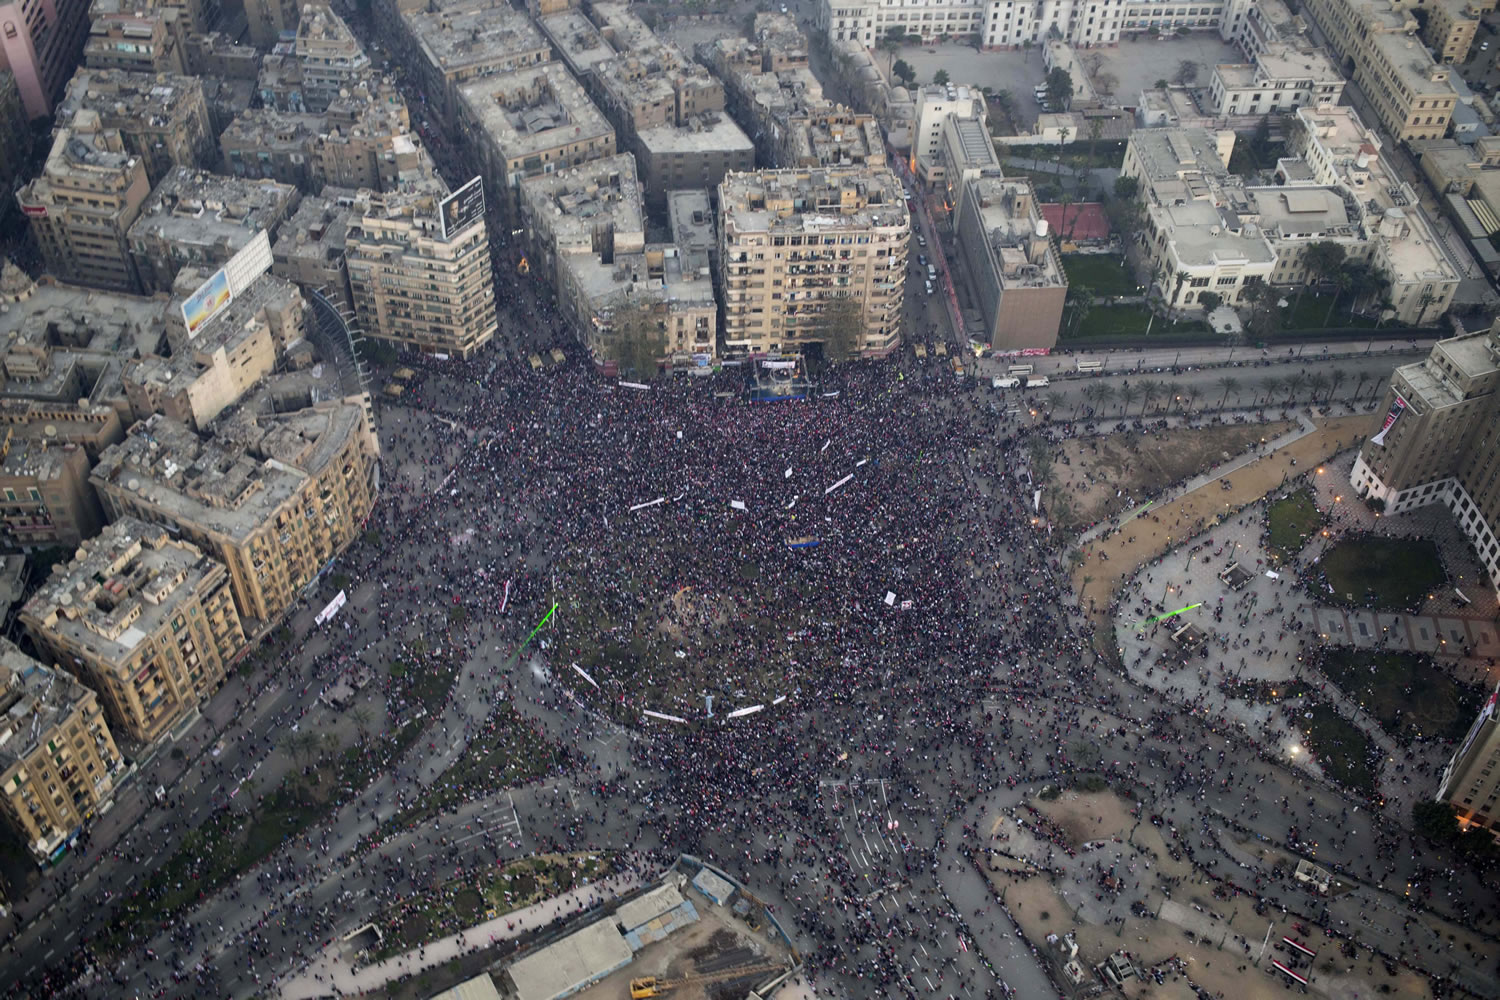 This aerial image made from an Egyptian army helicopter shows a general view of a pro-military rally Saturday in Tahrir Square, the epicenter of the 2011 uprising, in Cairo, Egypt.